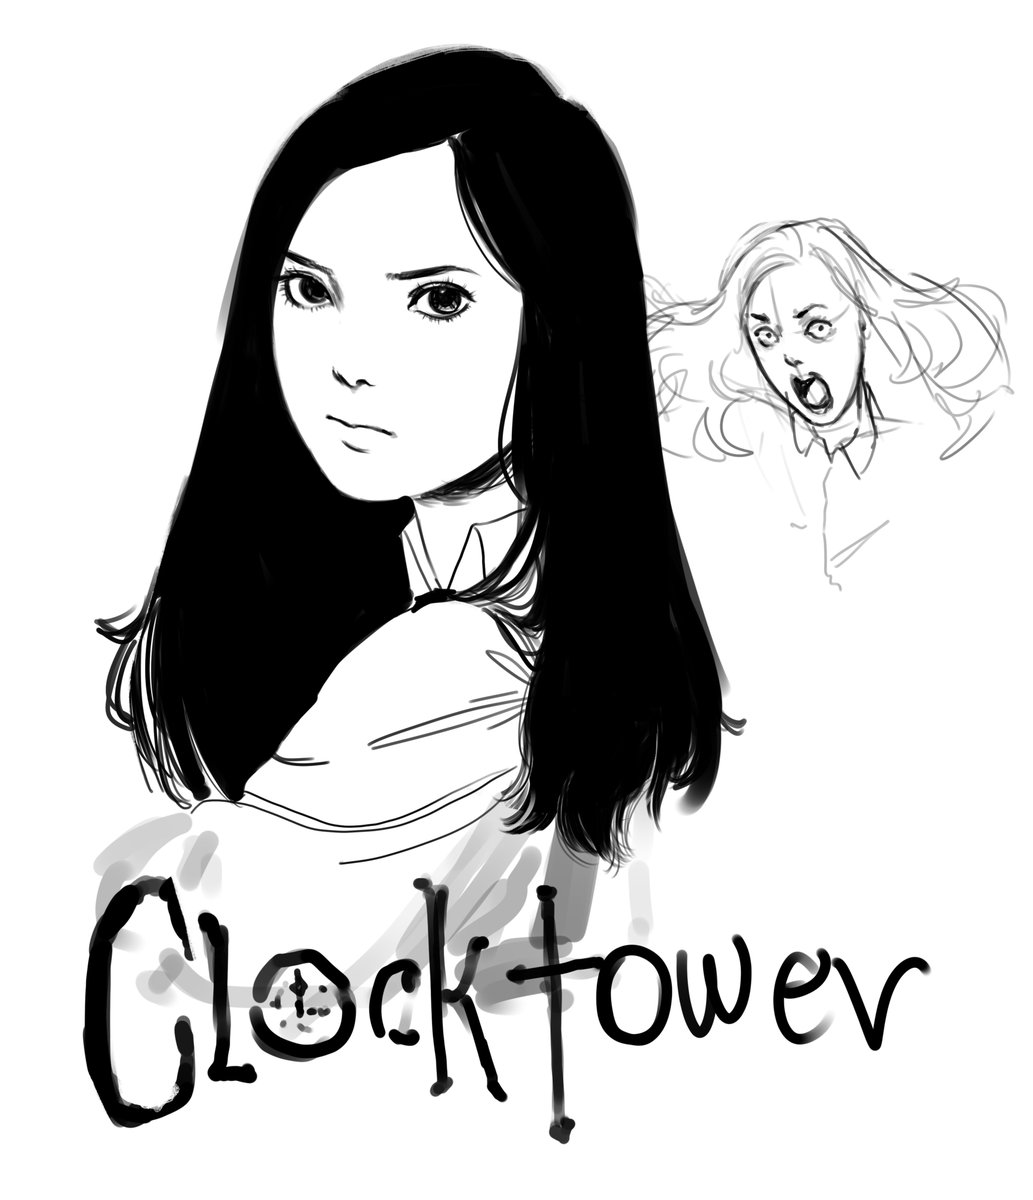 Made a junji ito styled clocktower sketch back in 2018. Also peep at that small sketch at the right cuz that became the clocktower artwork i did this year 